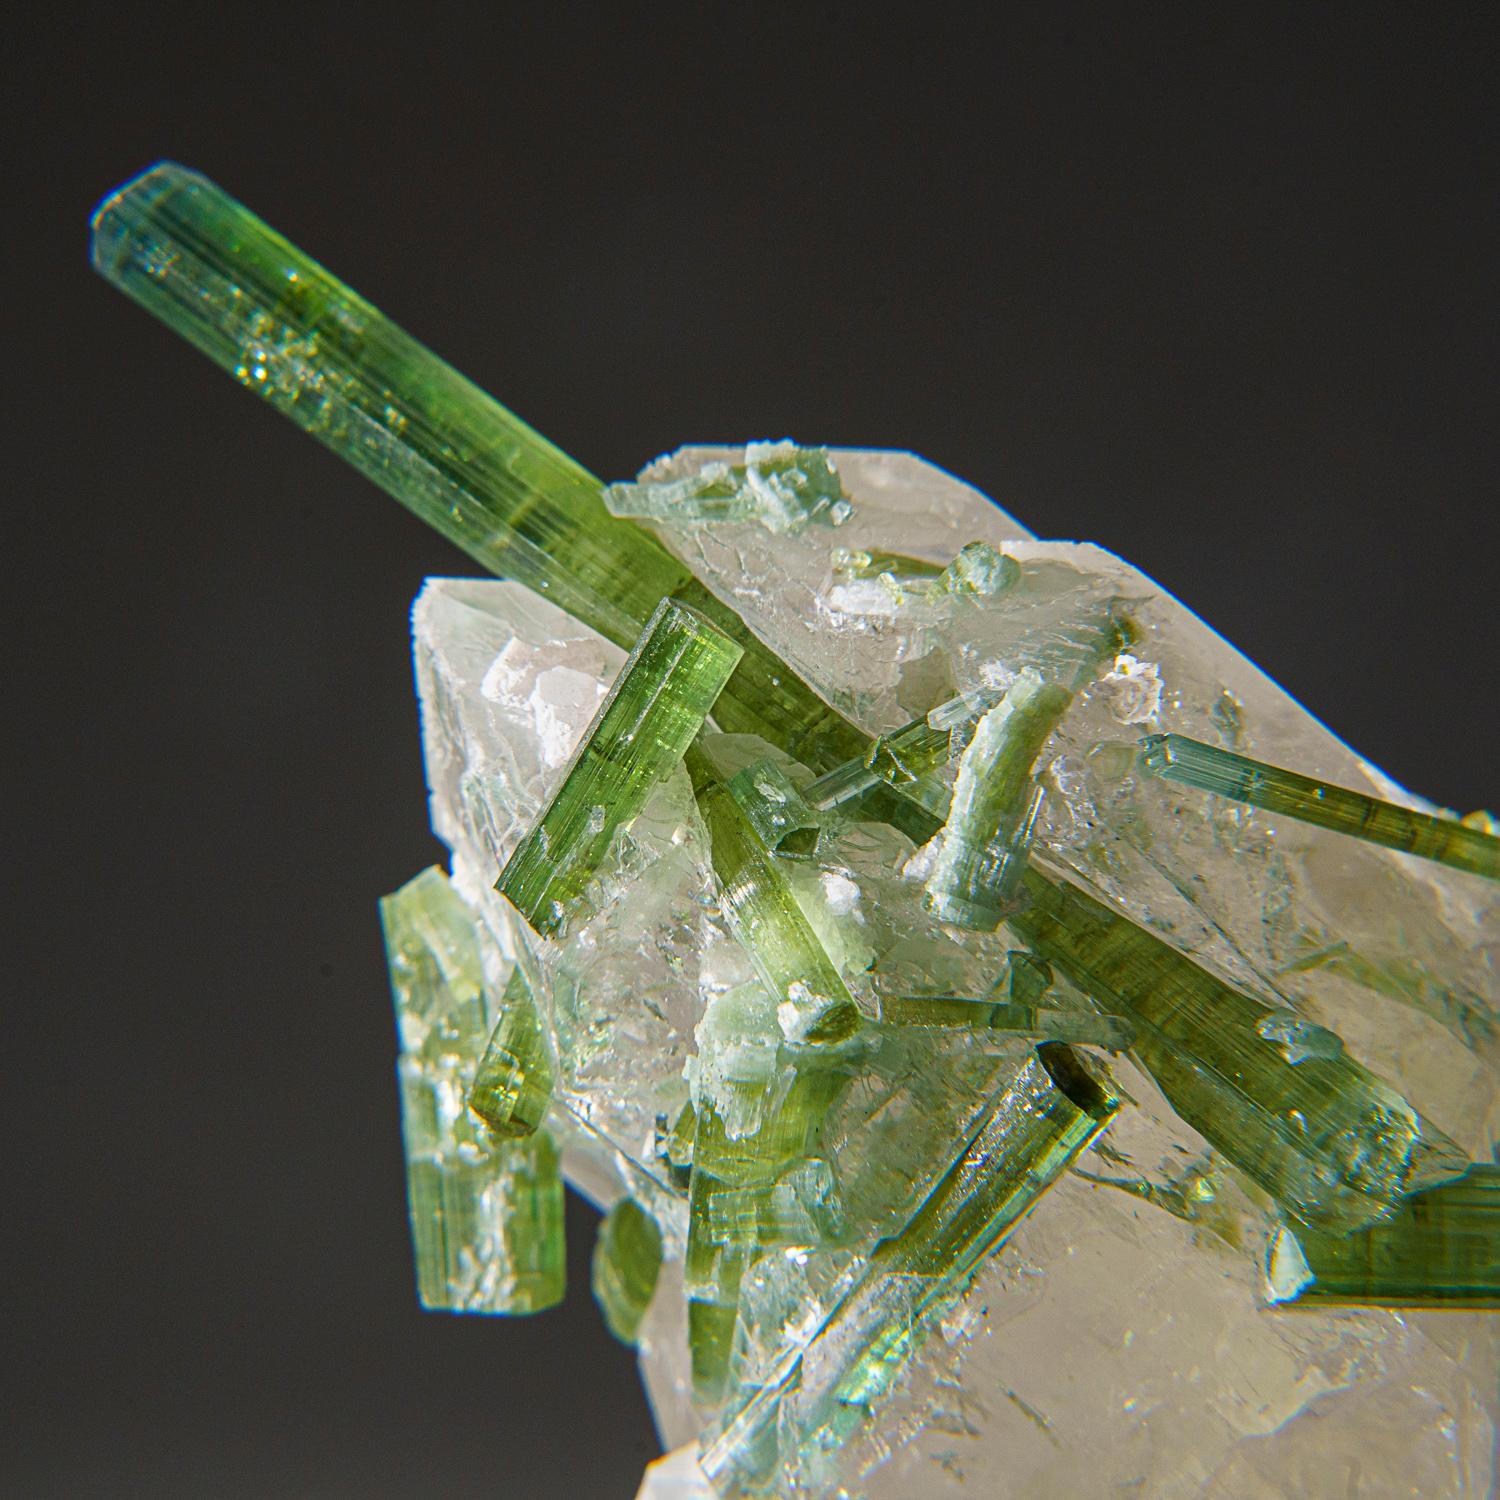 From Gilgit District, Gilgit-Baltistan, Pakistan 

Lustrous transparent green terminated elbaite tourmaline crystals in gray quartz with a few tabular milky quartz crystals. This unique specimen is highly prized for its rarity and beauty, and makes